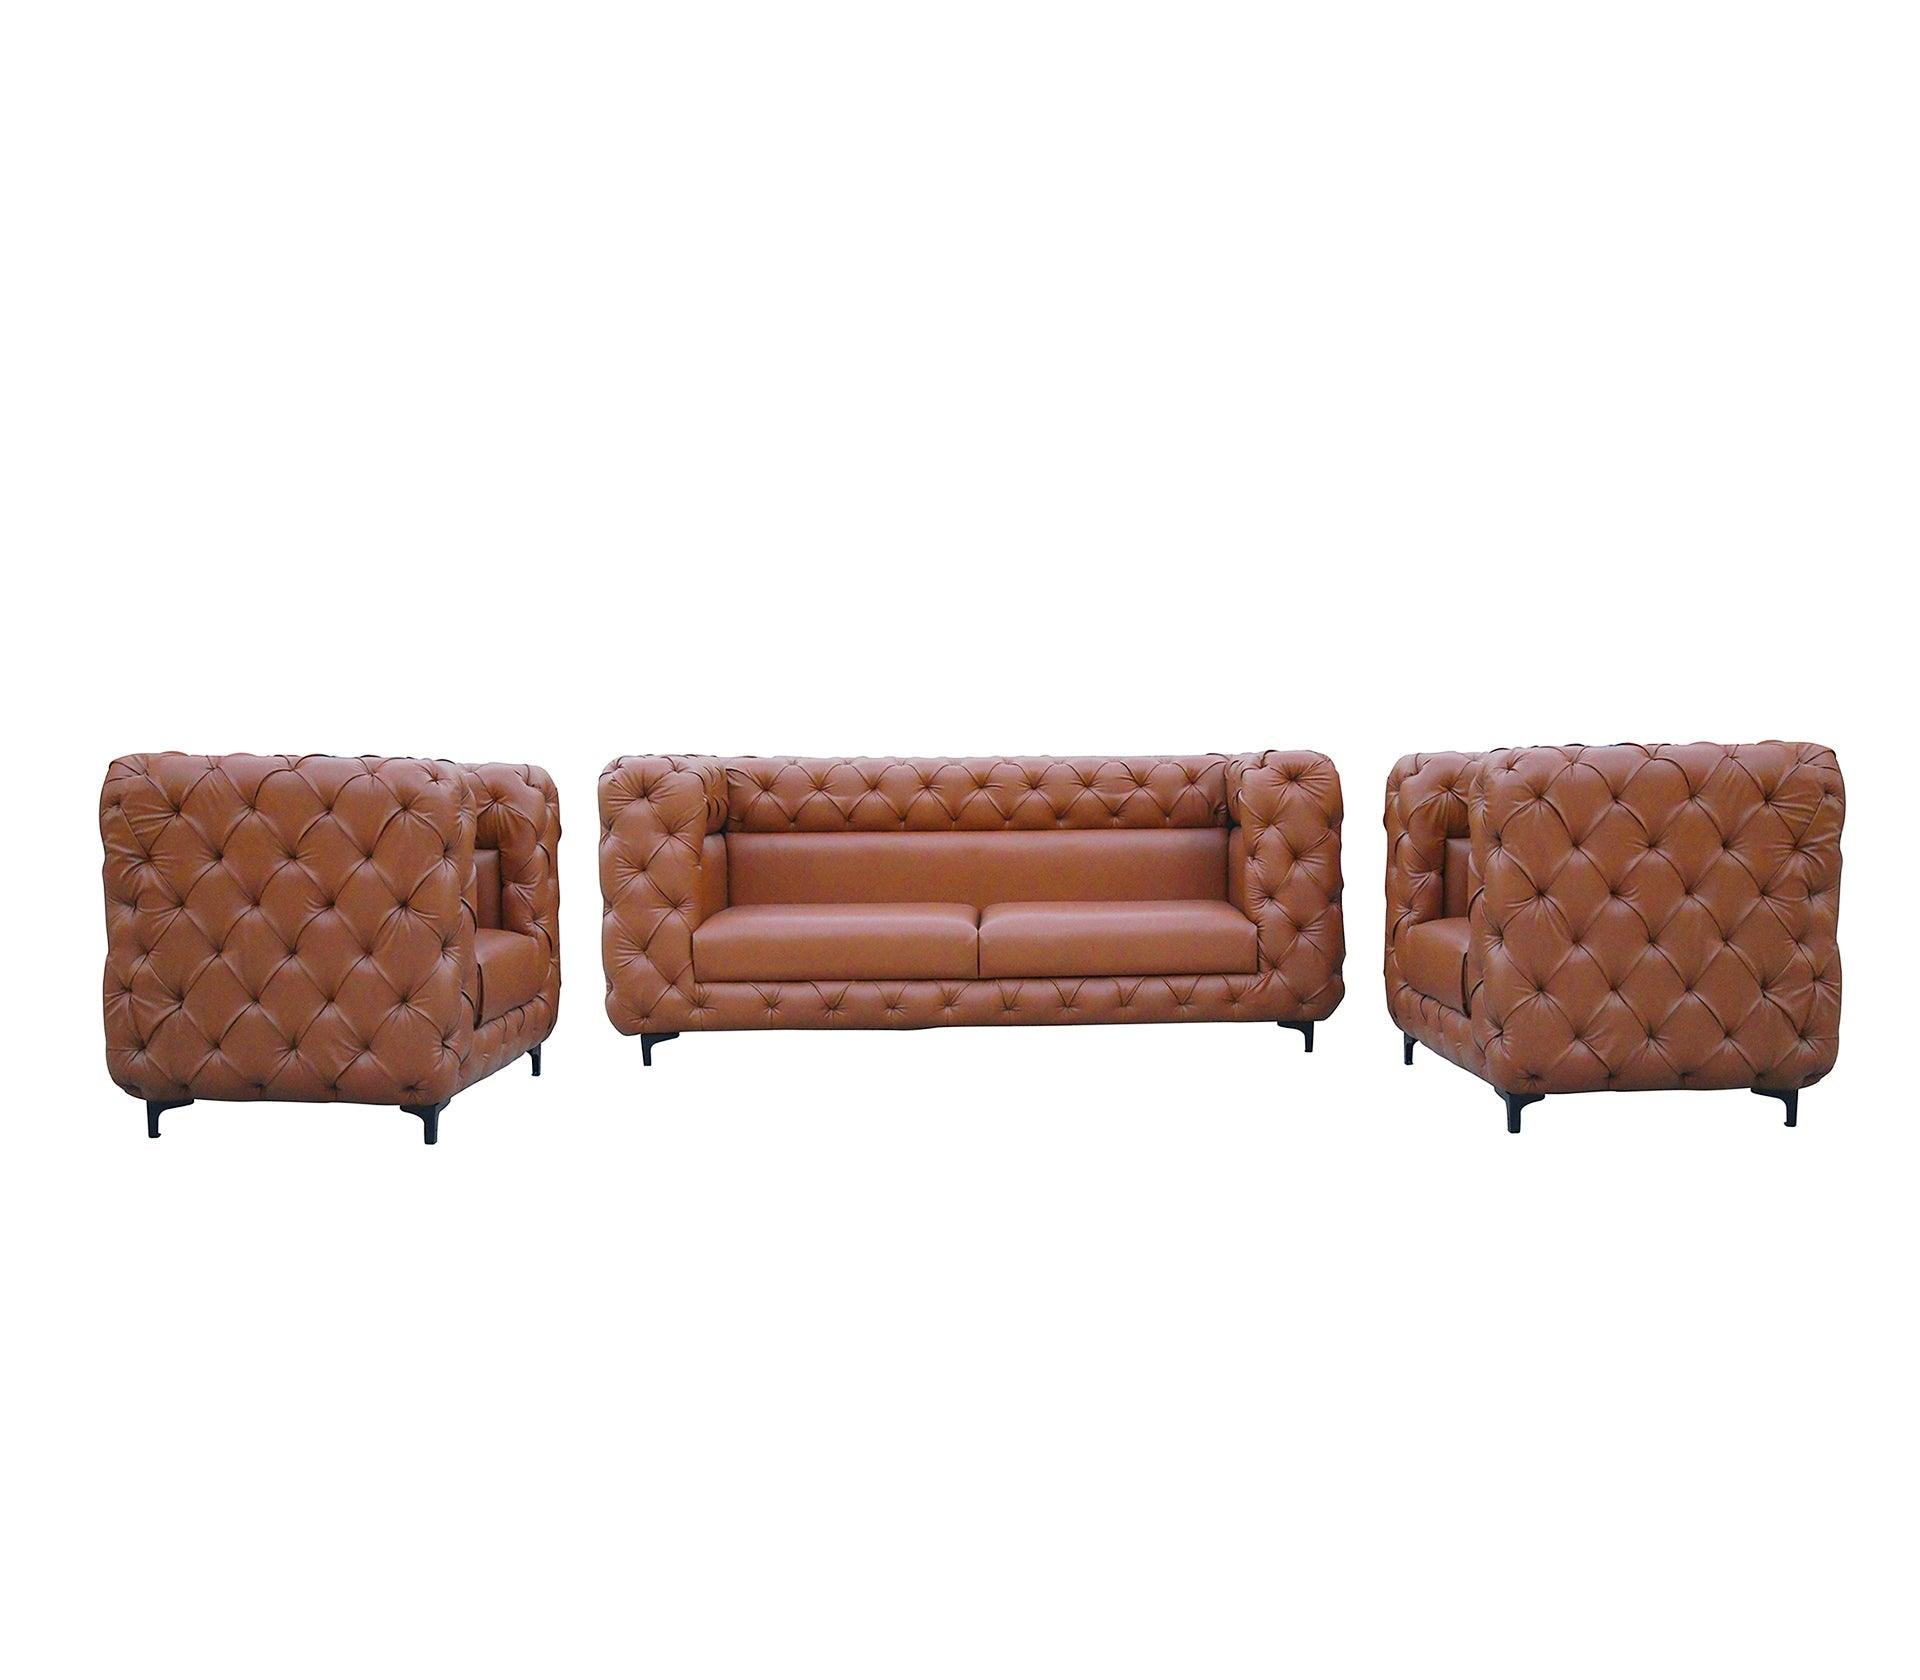 Brownie Candy Sofa Set 3+1+1 With Golden Legs - Furniture Castle